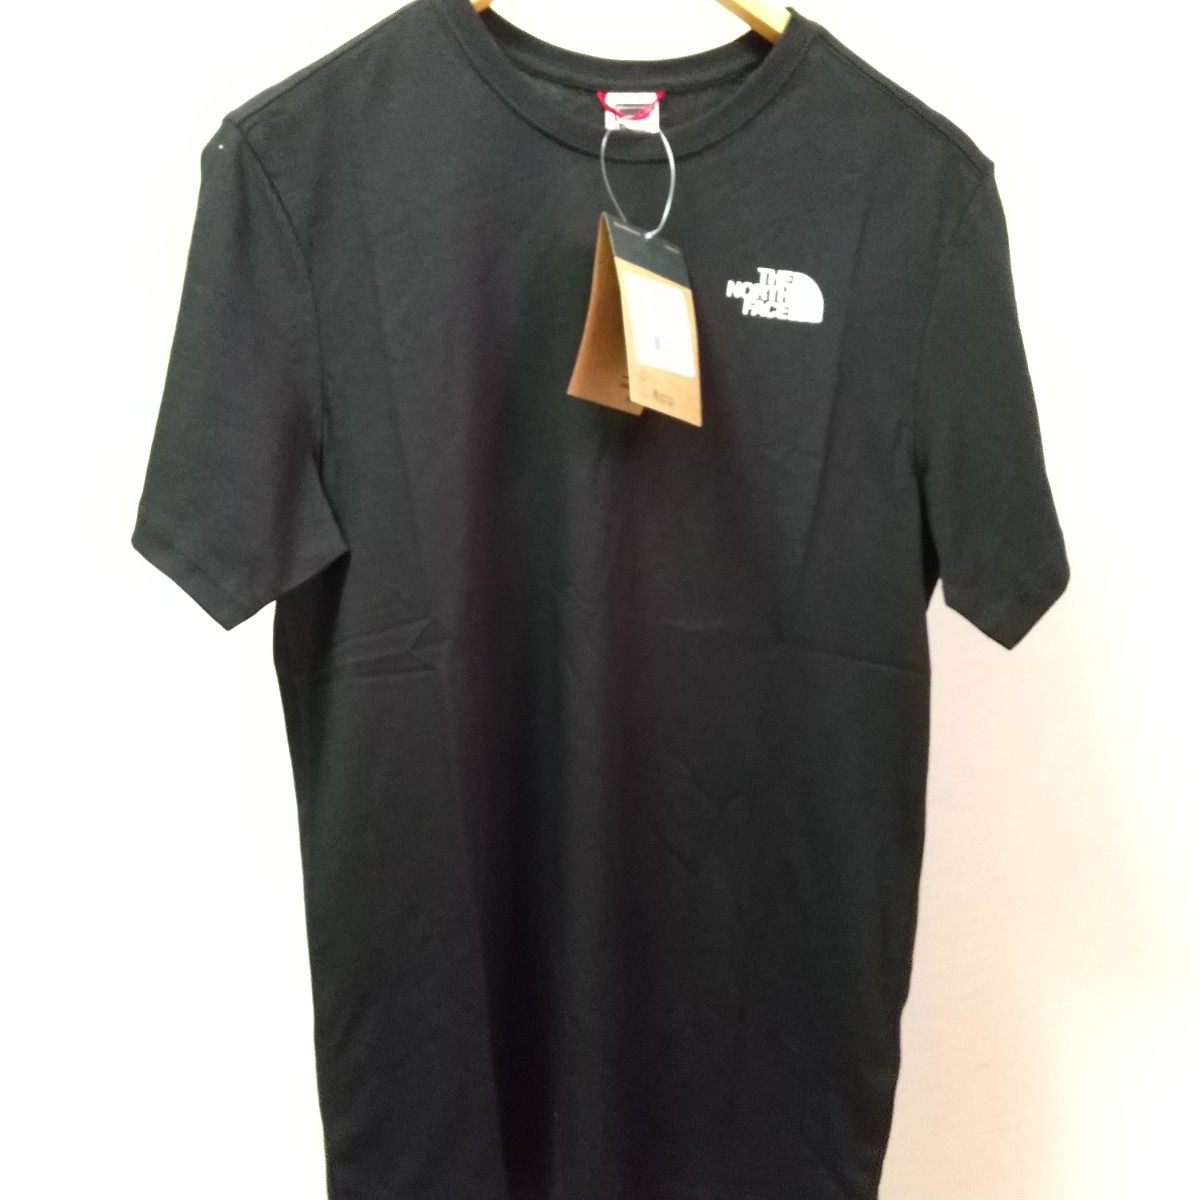 THE NORTH FACE graph tee